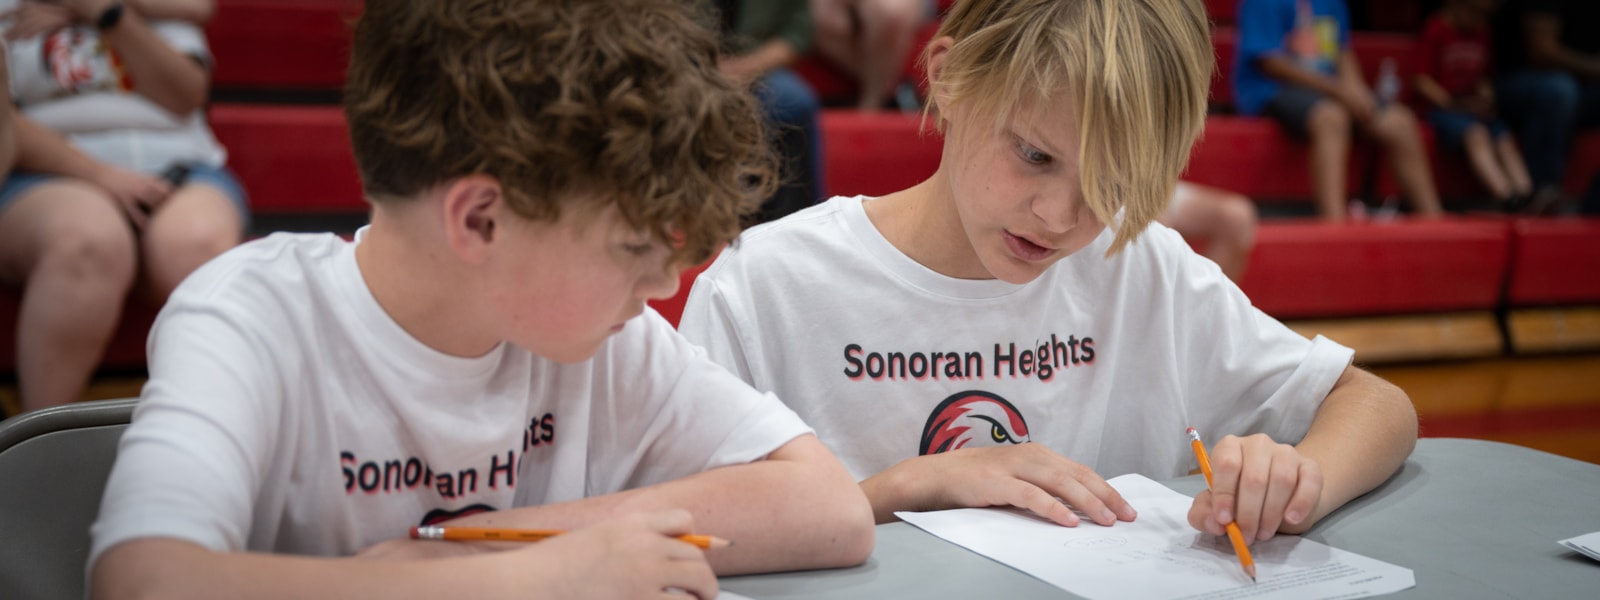 Two students from Sonoran Heights Middle School work on a math problem together at the Dysart Math Challenge.